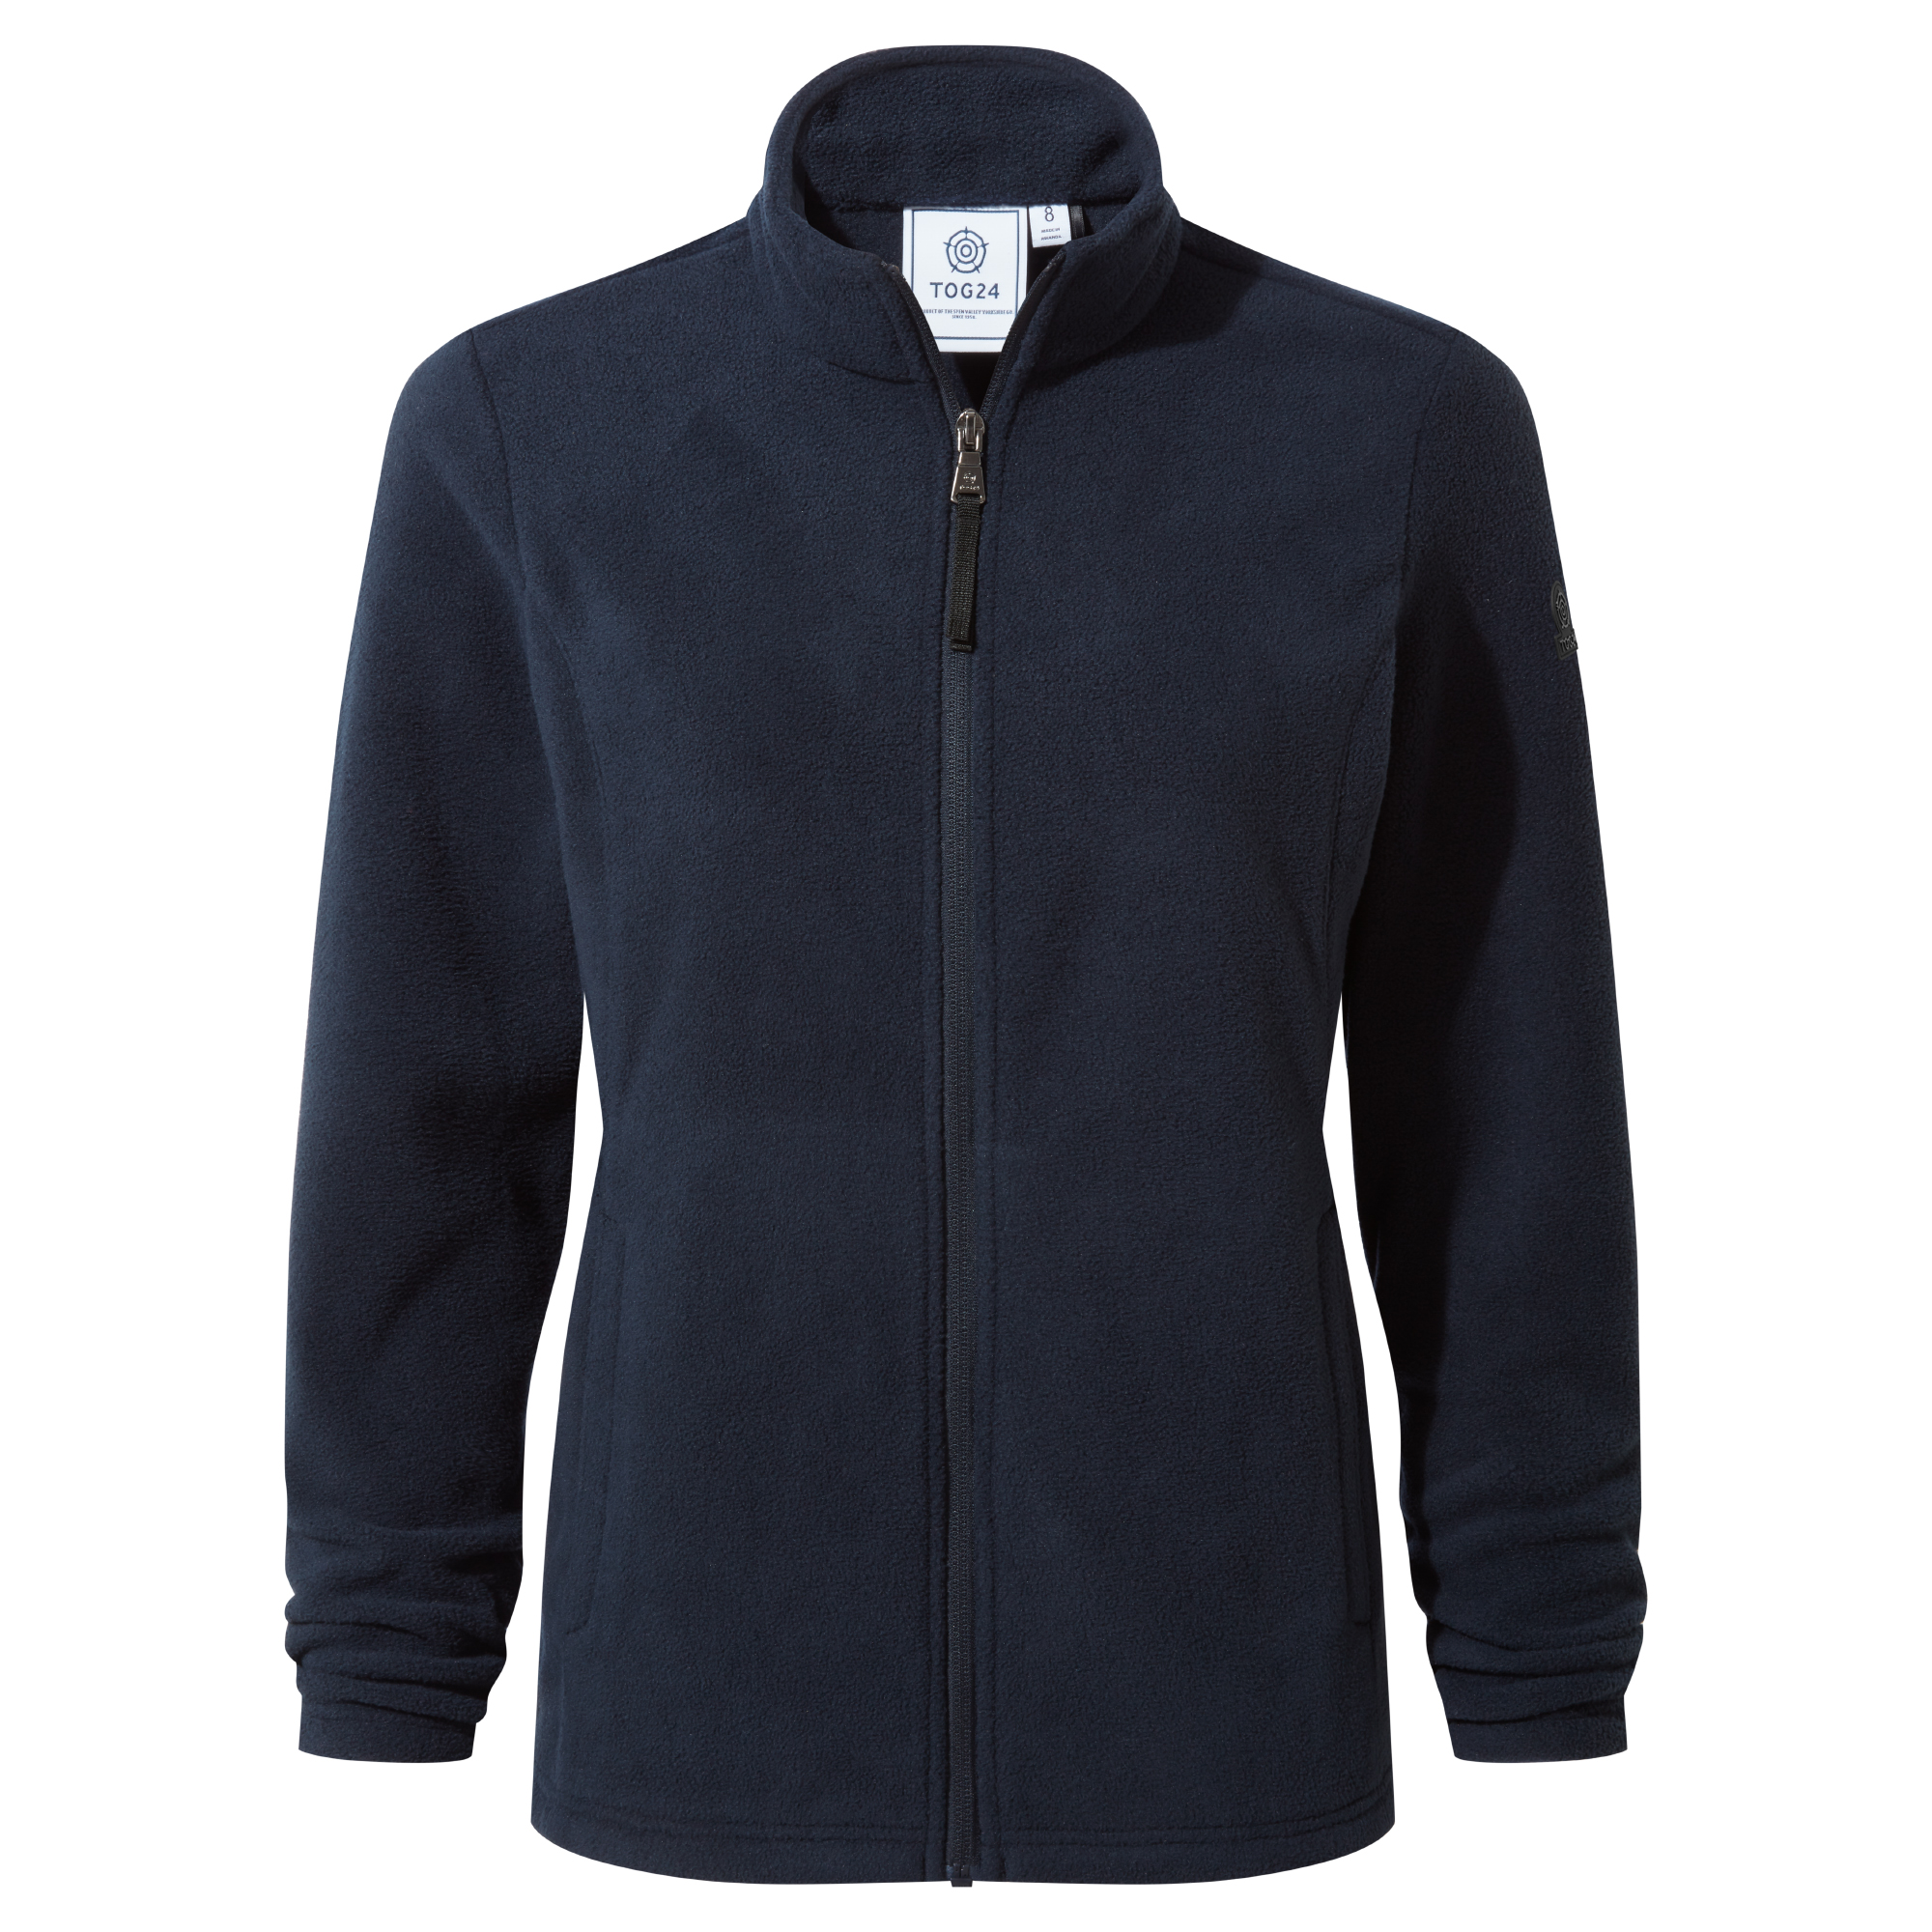 TOG24 Revive Womens Fleece Jacket 100% Recycled Polyester With Full Zip ...